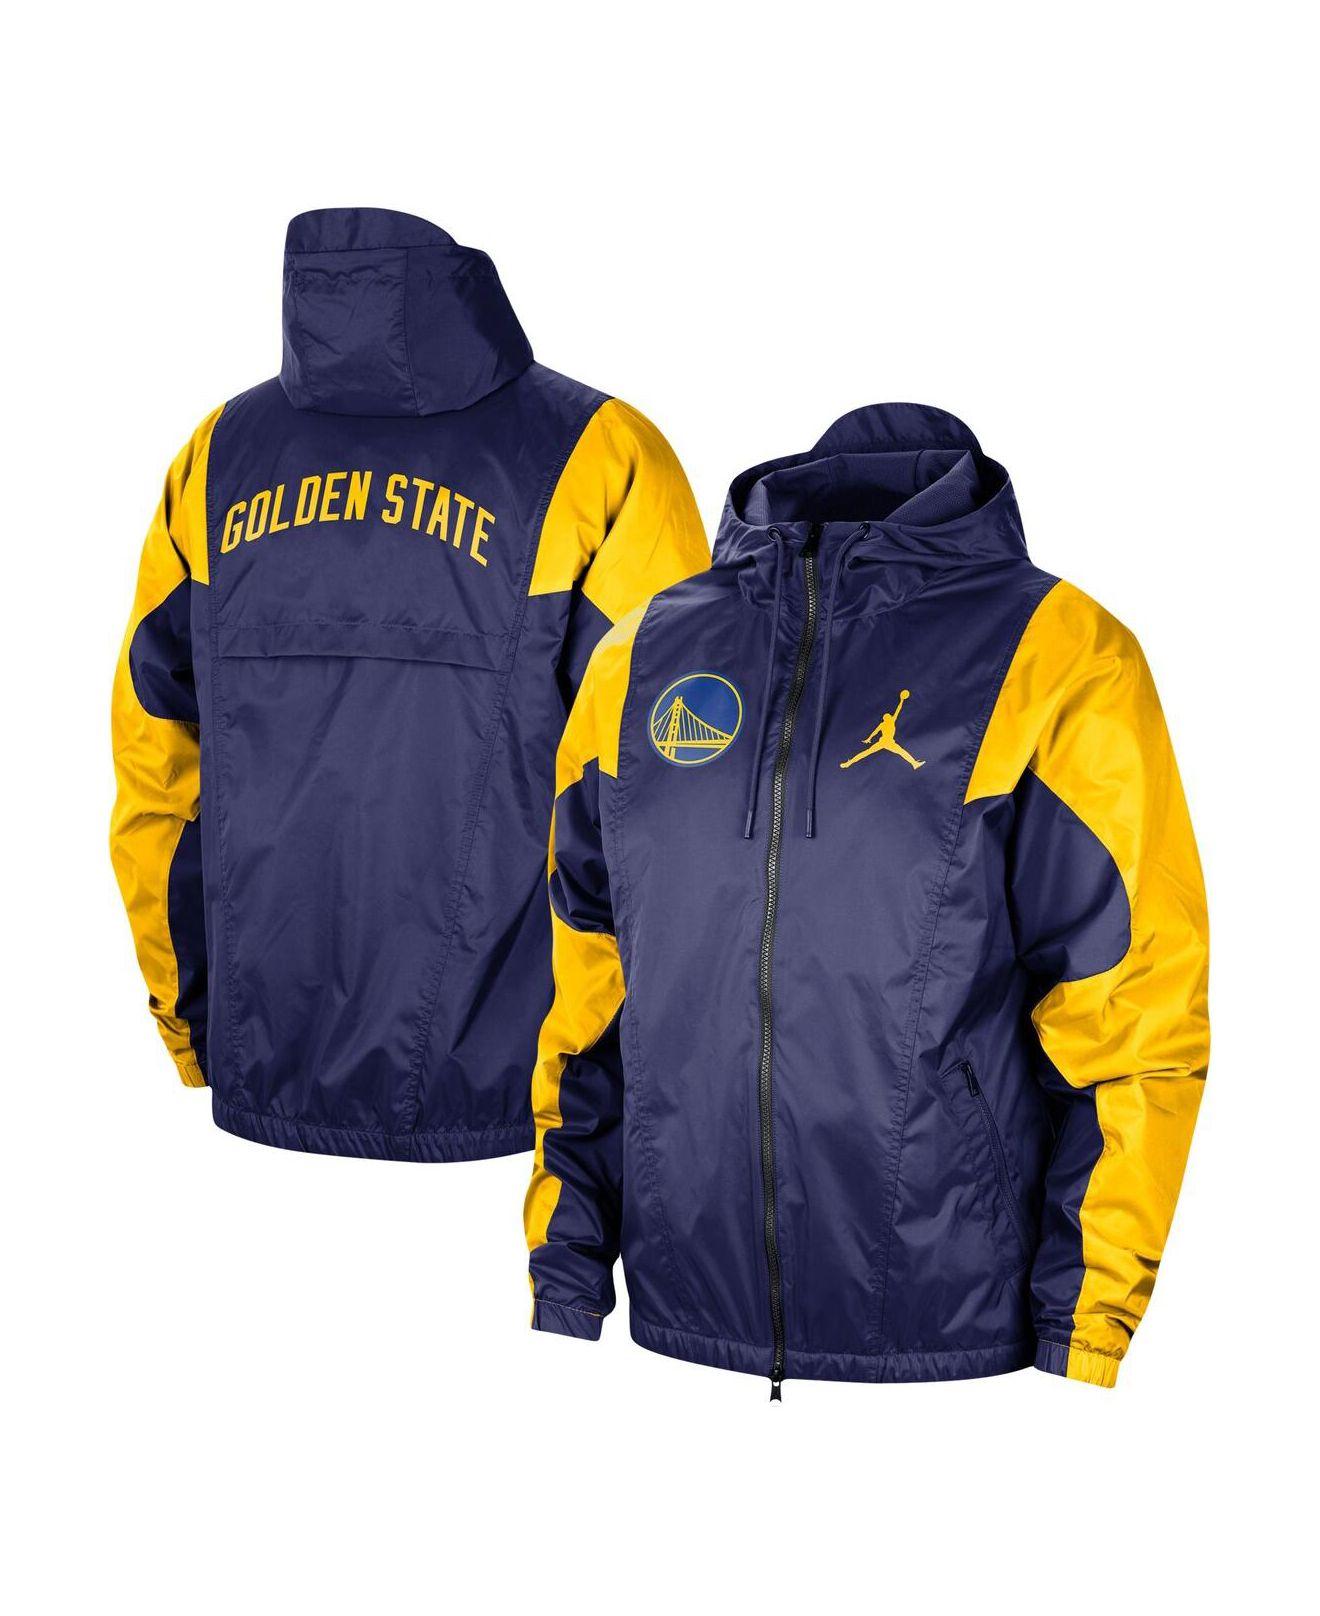 Nike THERMA FLEX SHOWTIME NBA Warrior Jacket Player Edition Blue